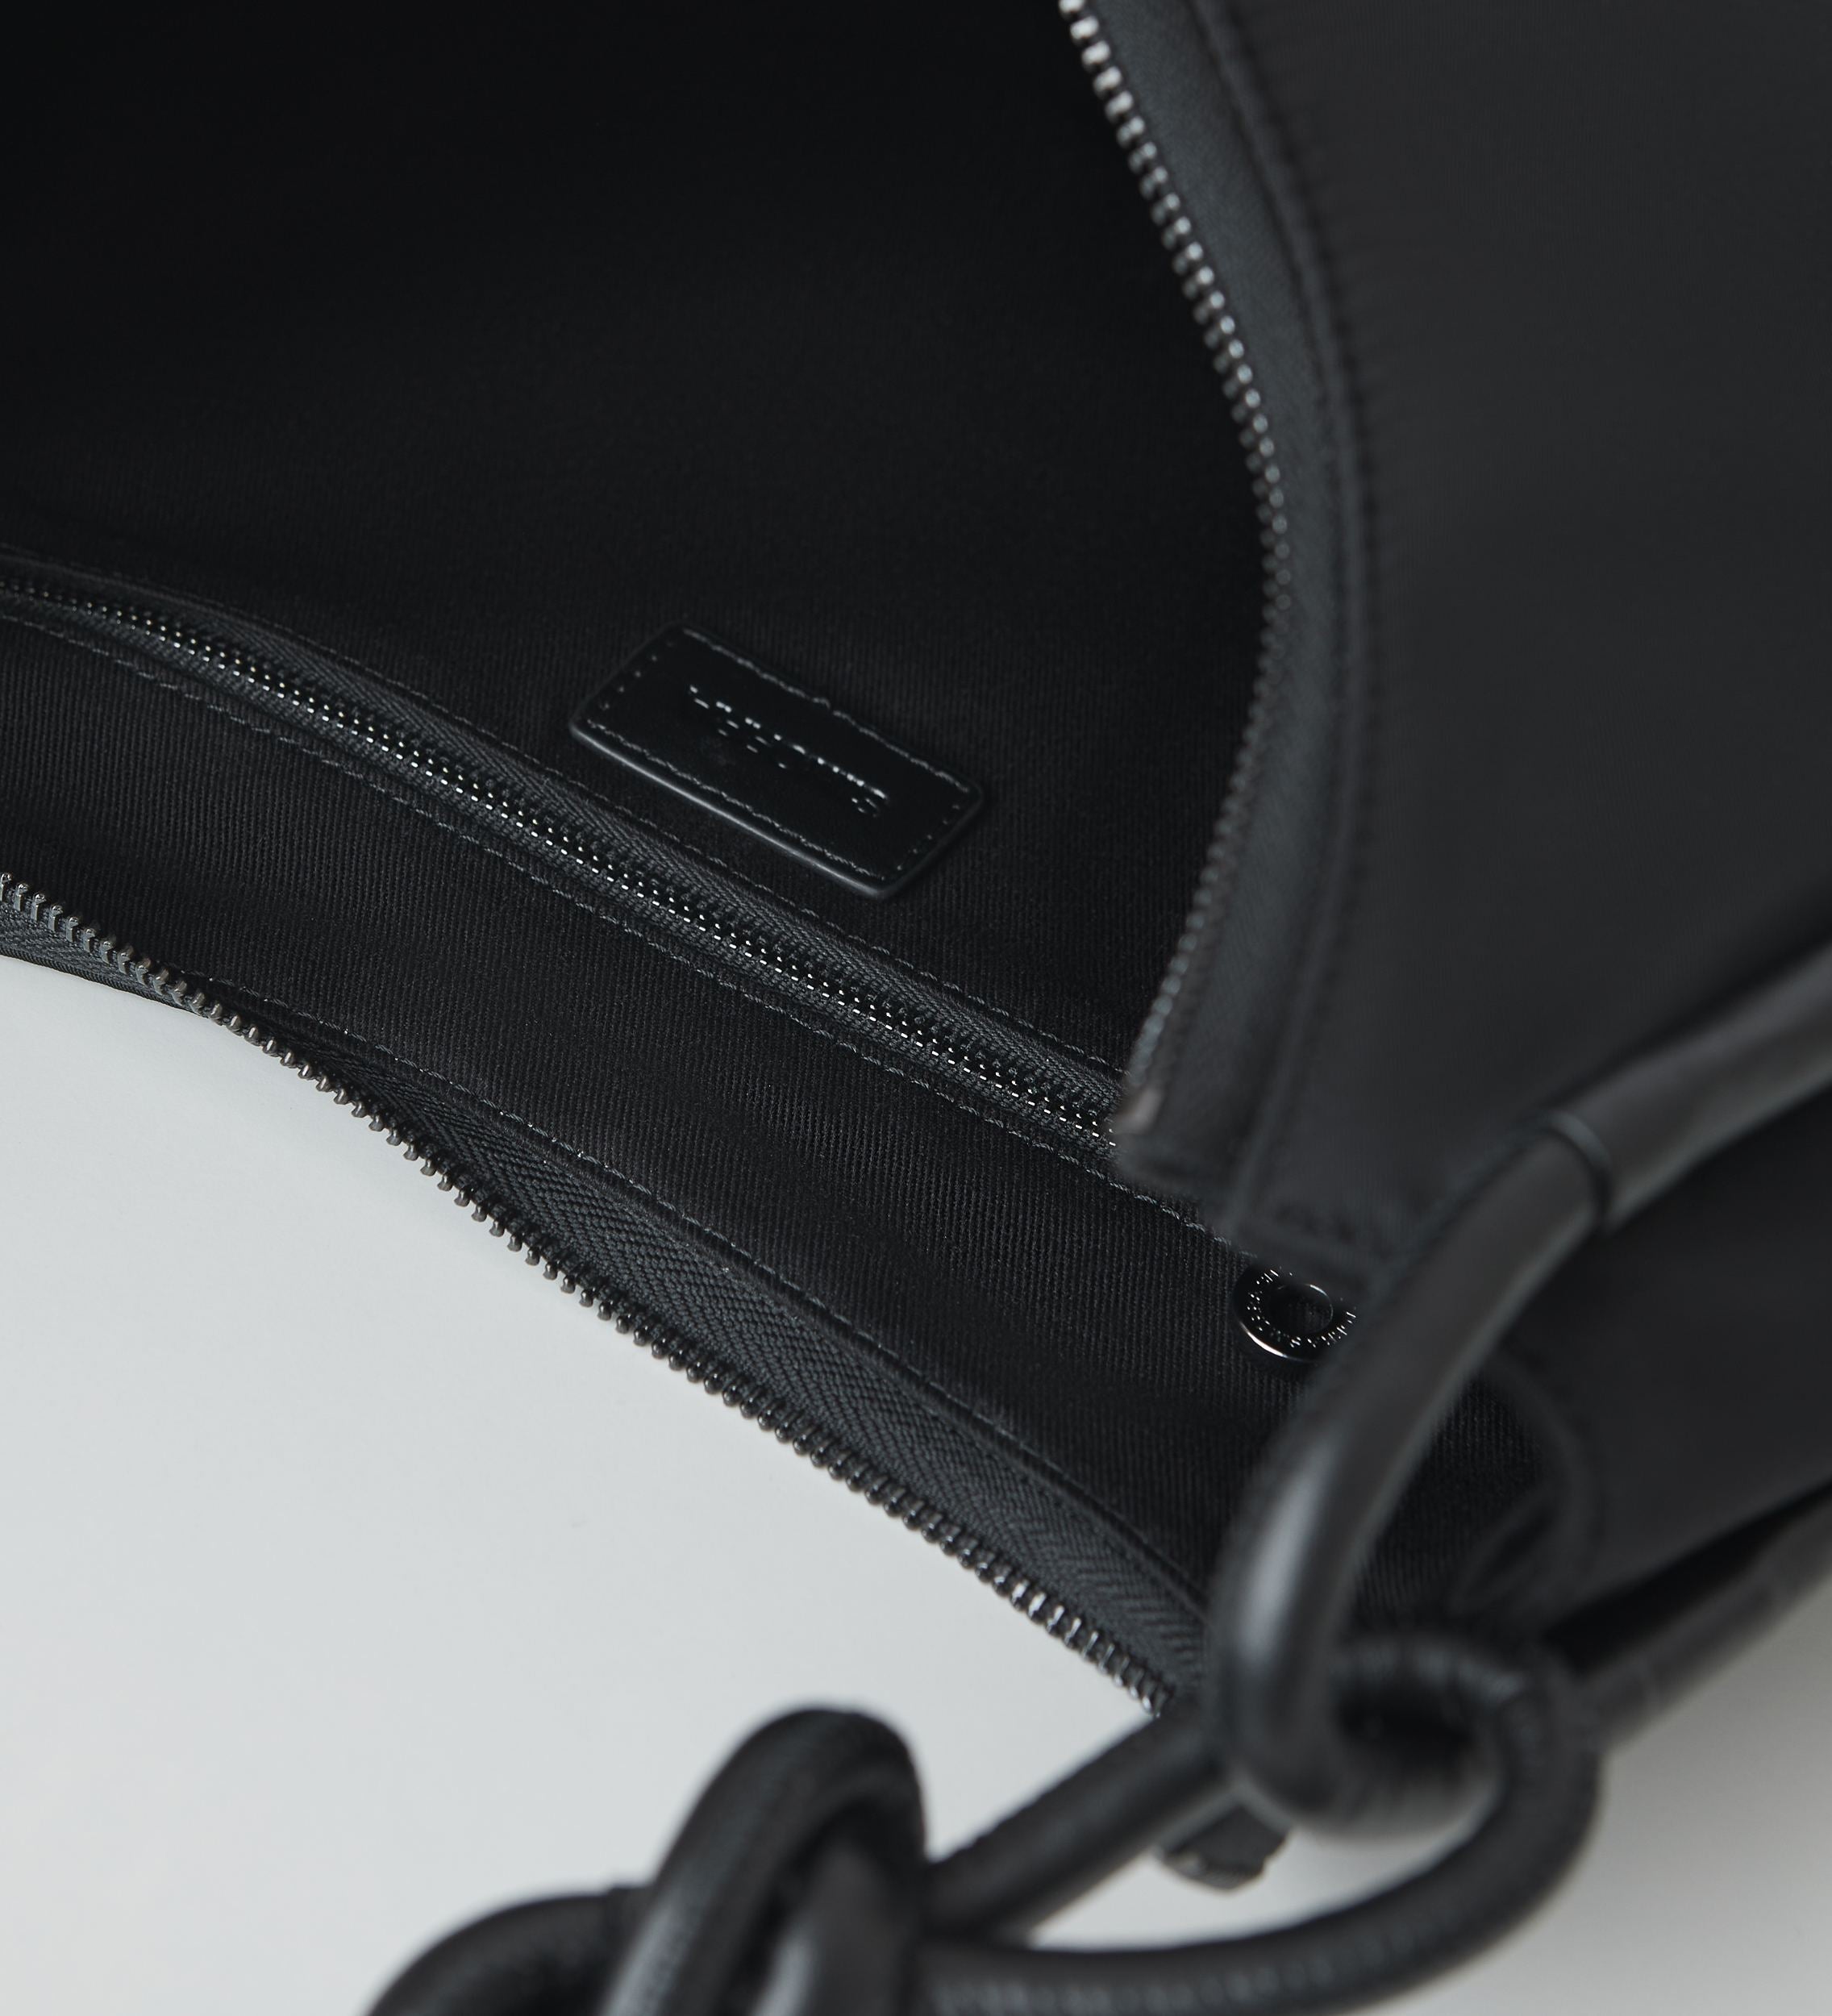 Technical and leather bag